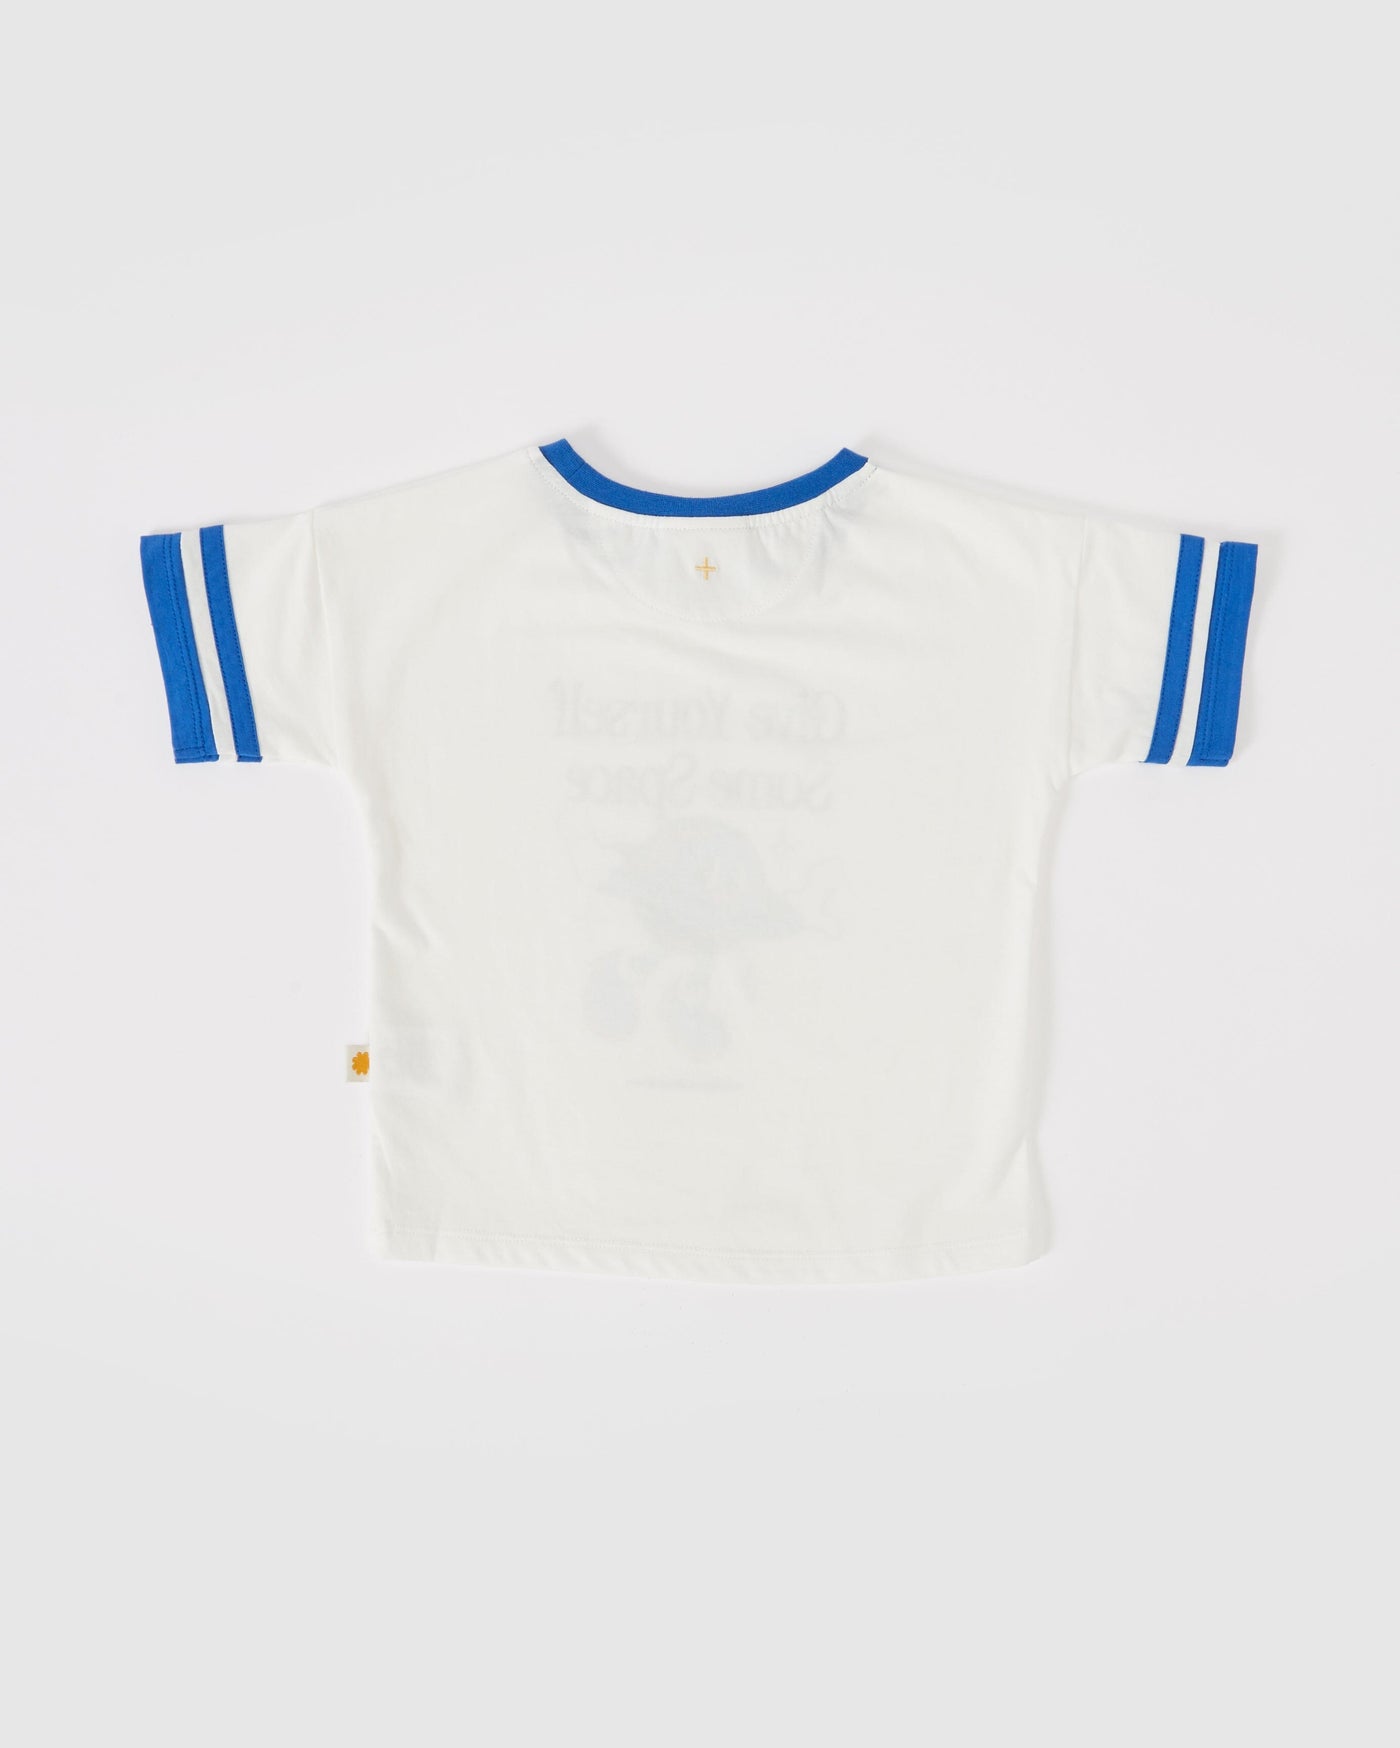 Goldie & Ace Give Yourself Some Space T-Shirt - Ivory Short Sleeve T-Shirt Goldie & Ace 